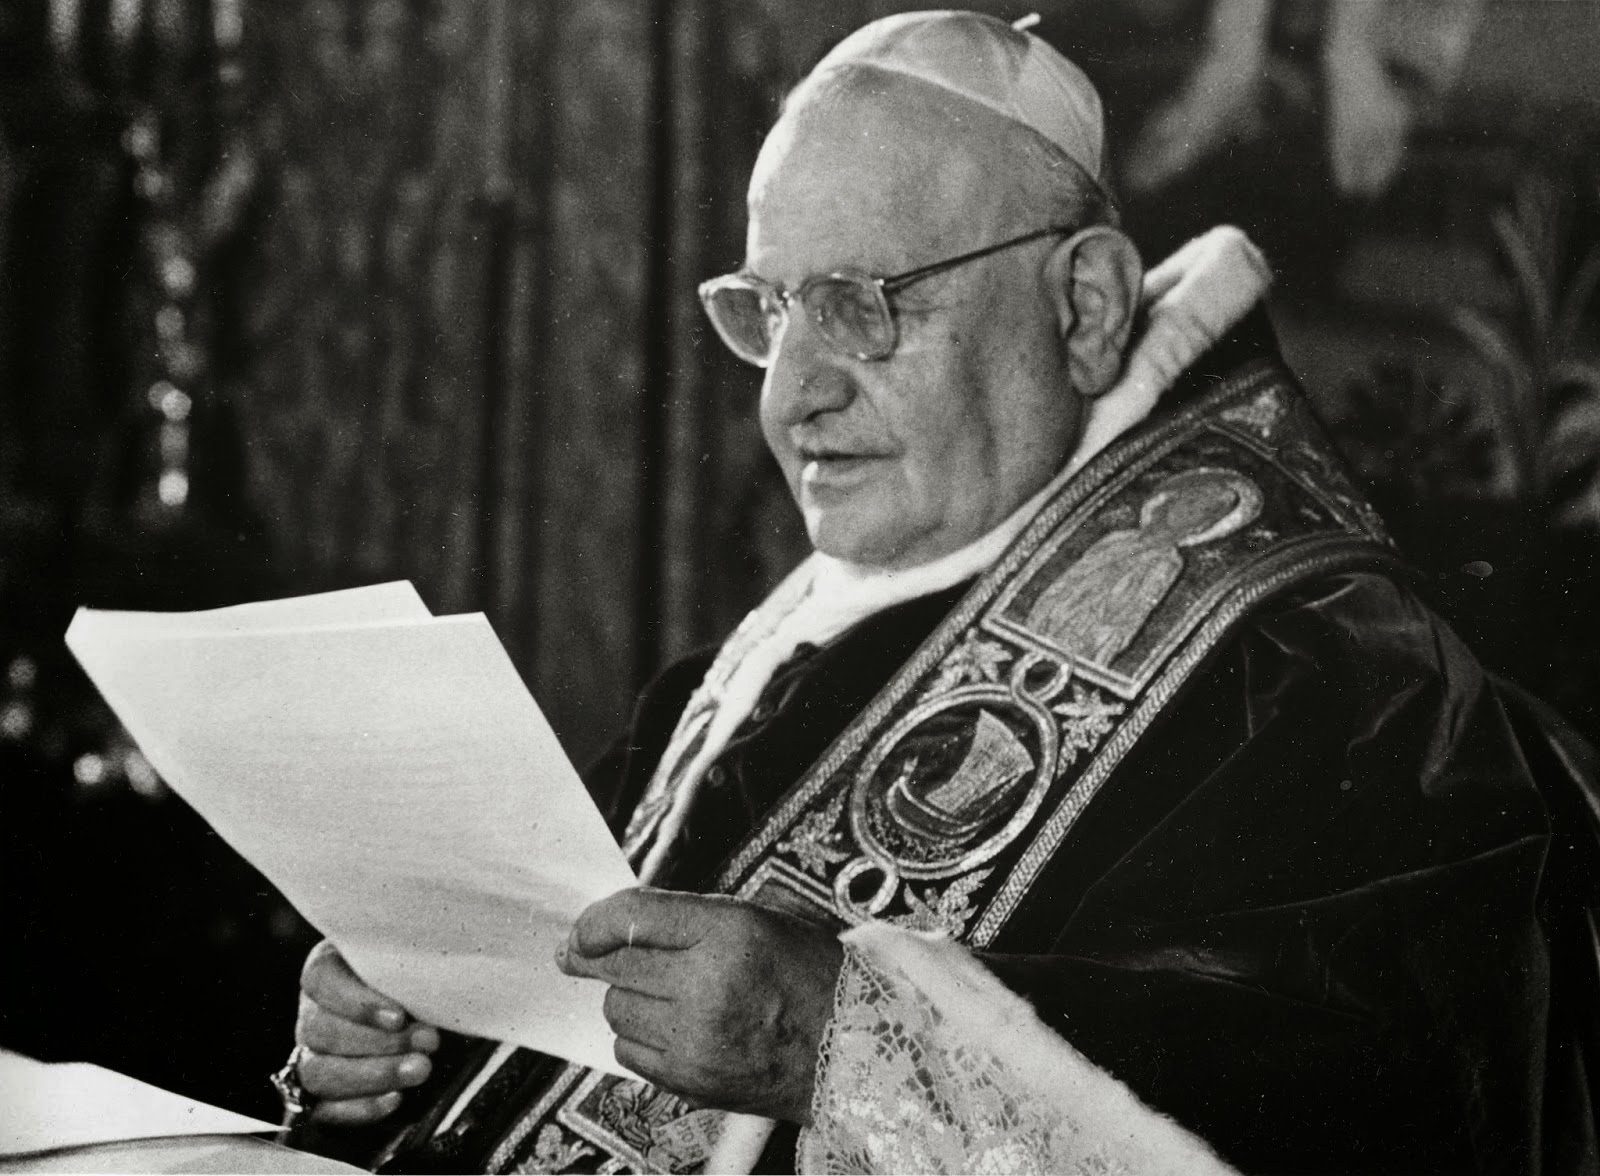 pope-john-xxiii-the-saint-who-launched-vatican-ii-and-inspired-the